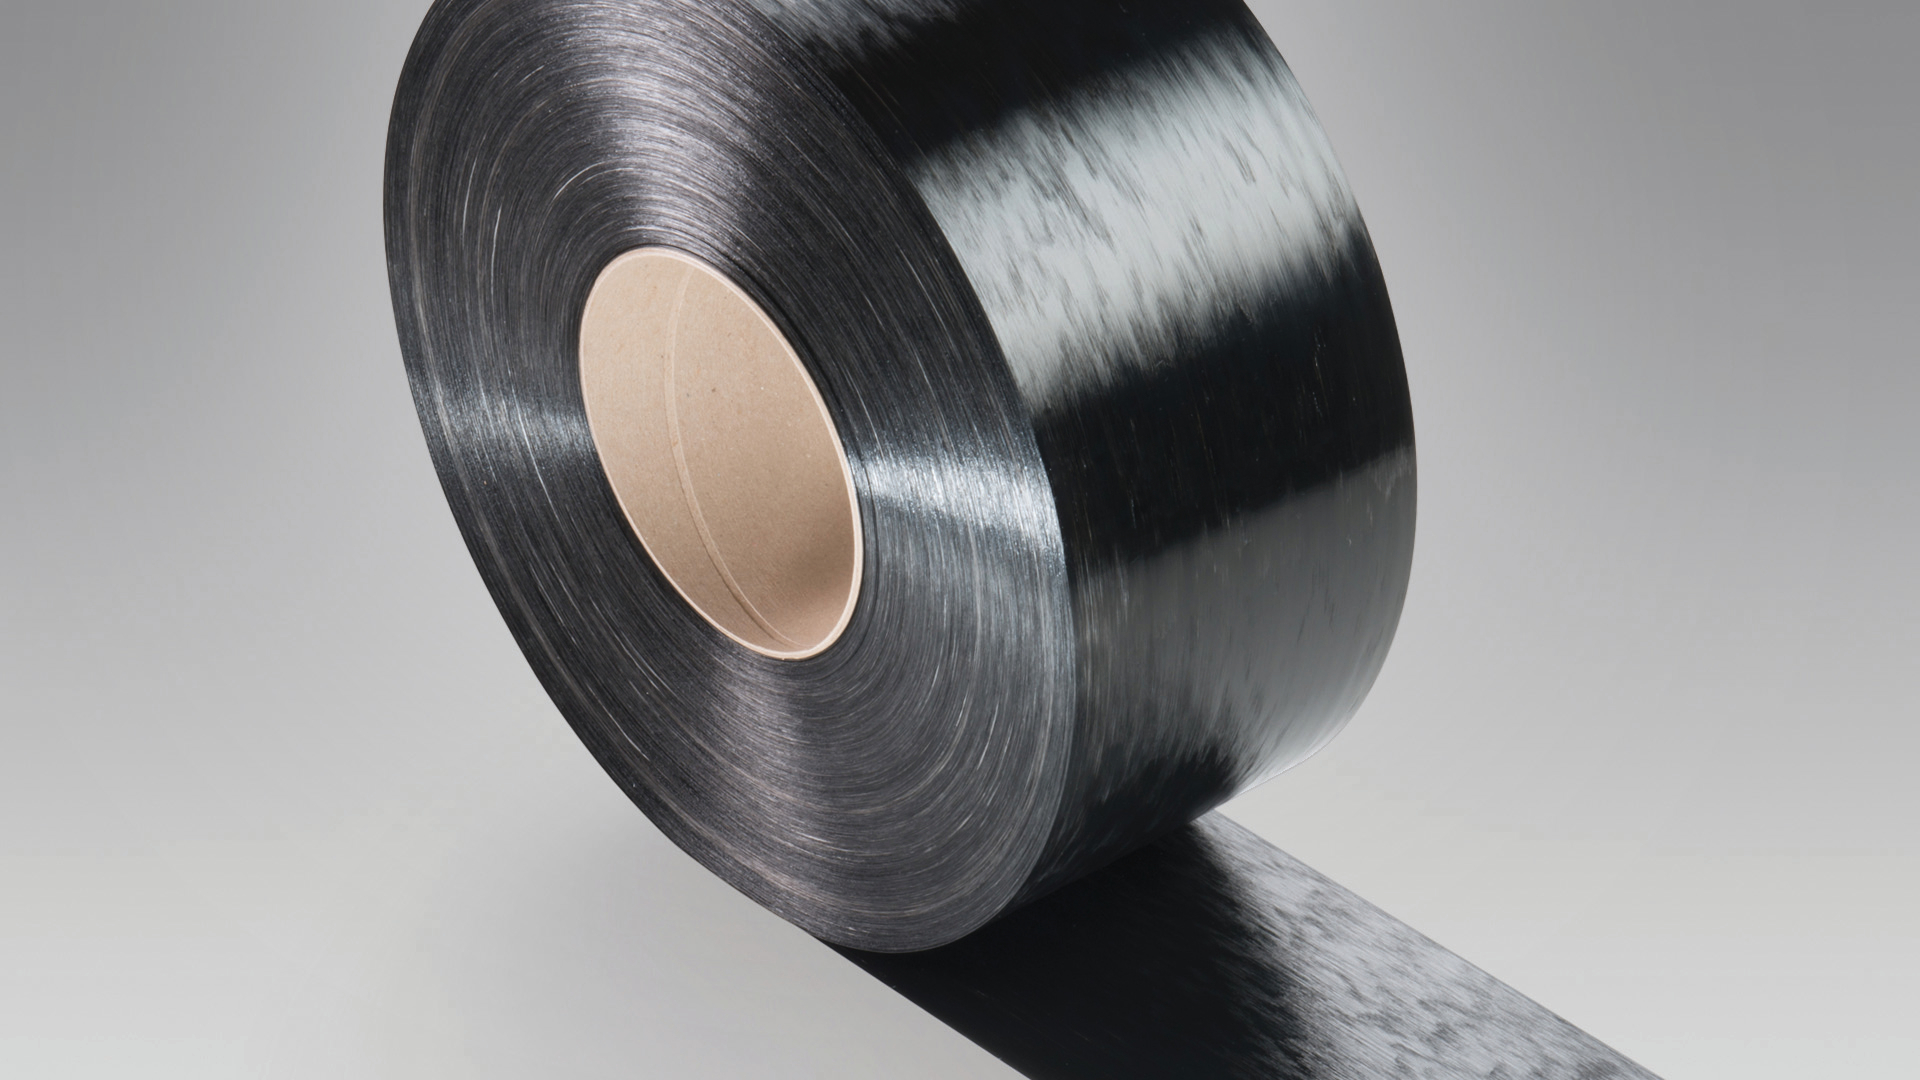 Toray and BASF have reportedly signed an agreement to produce continuous fiber reinforced thermoplastic (CFRT) tapes.